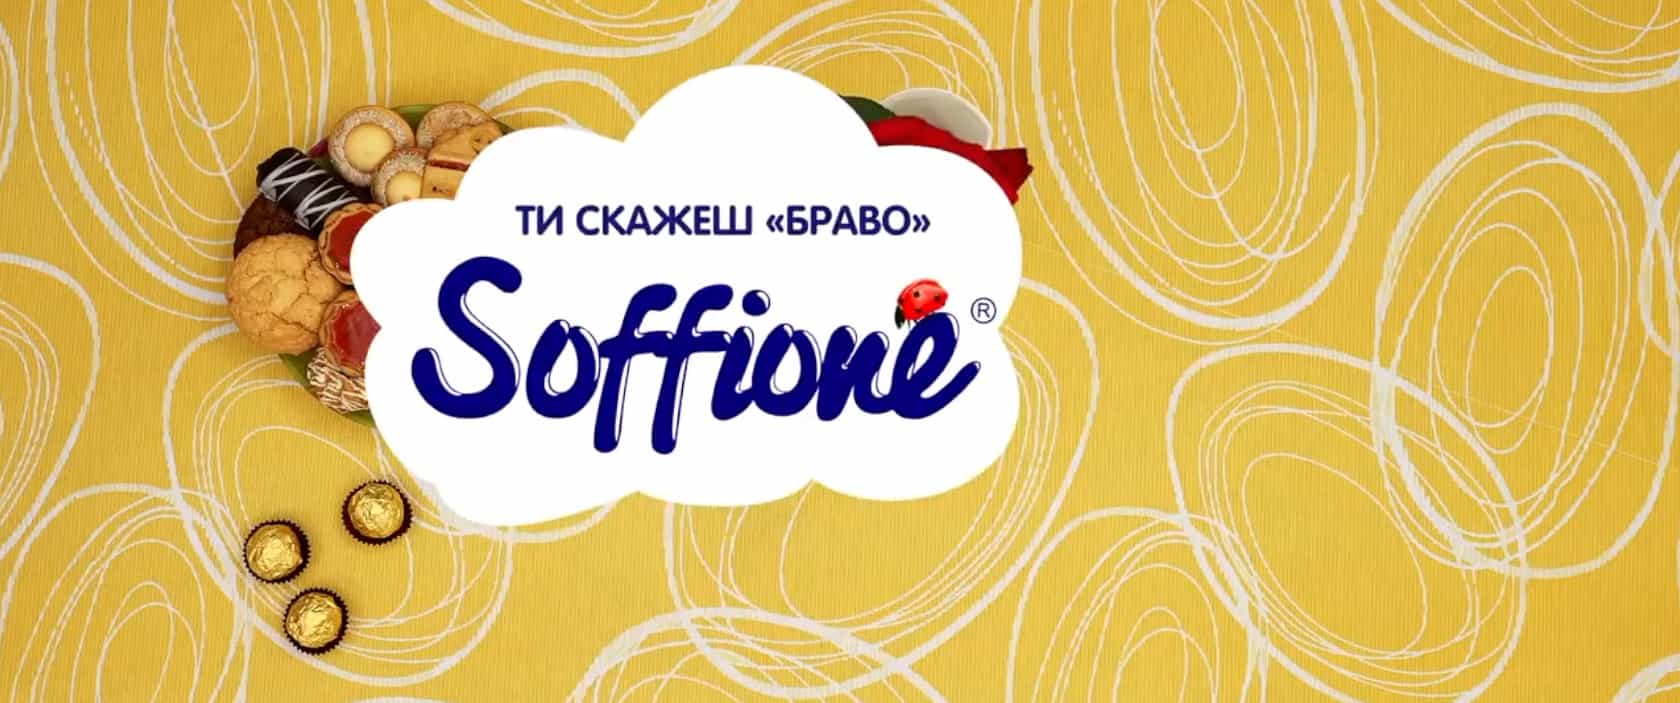 Case advertising for the web" Soffione"